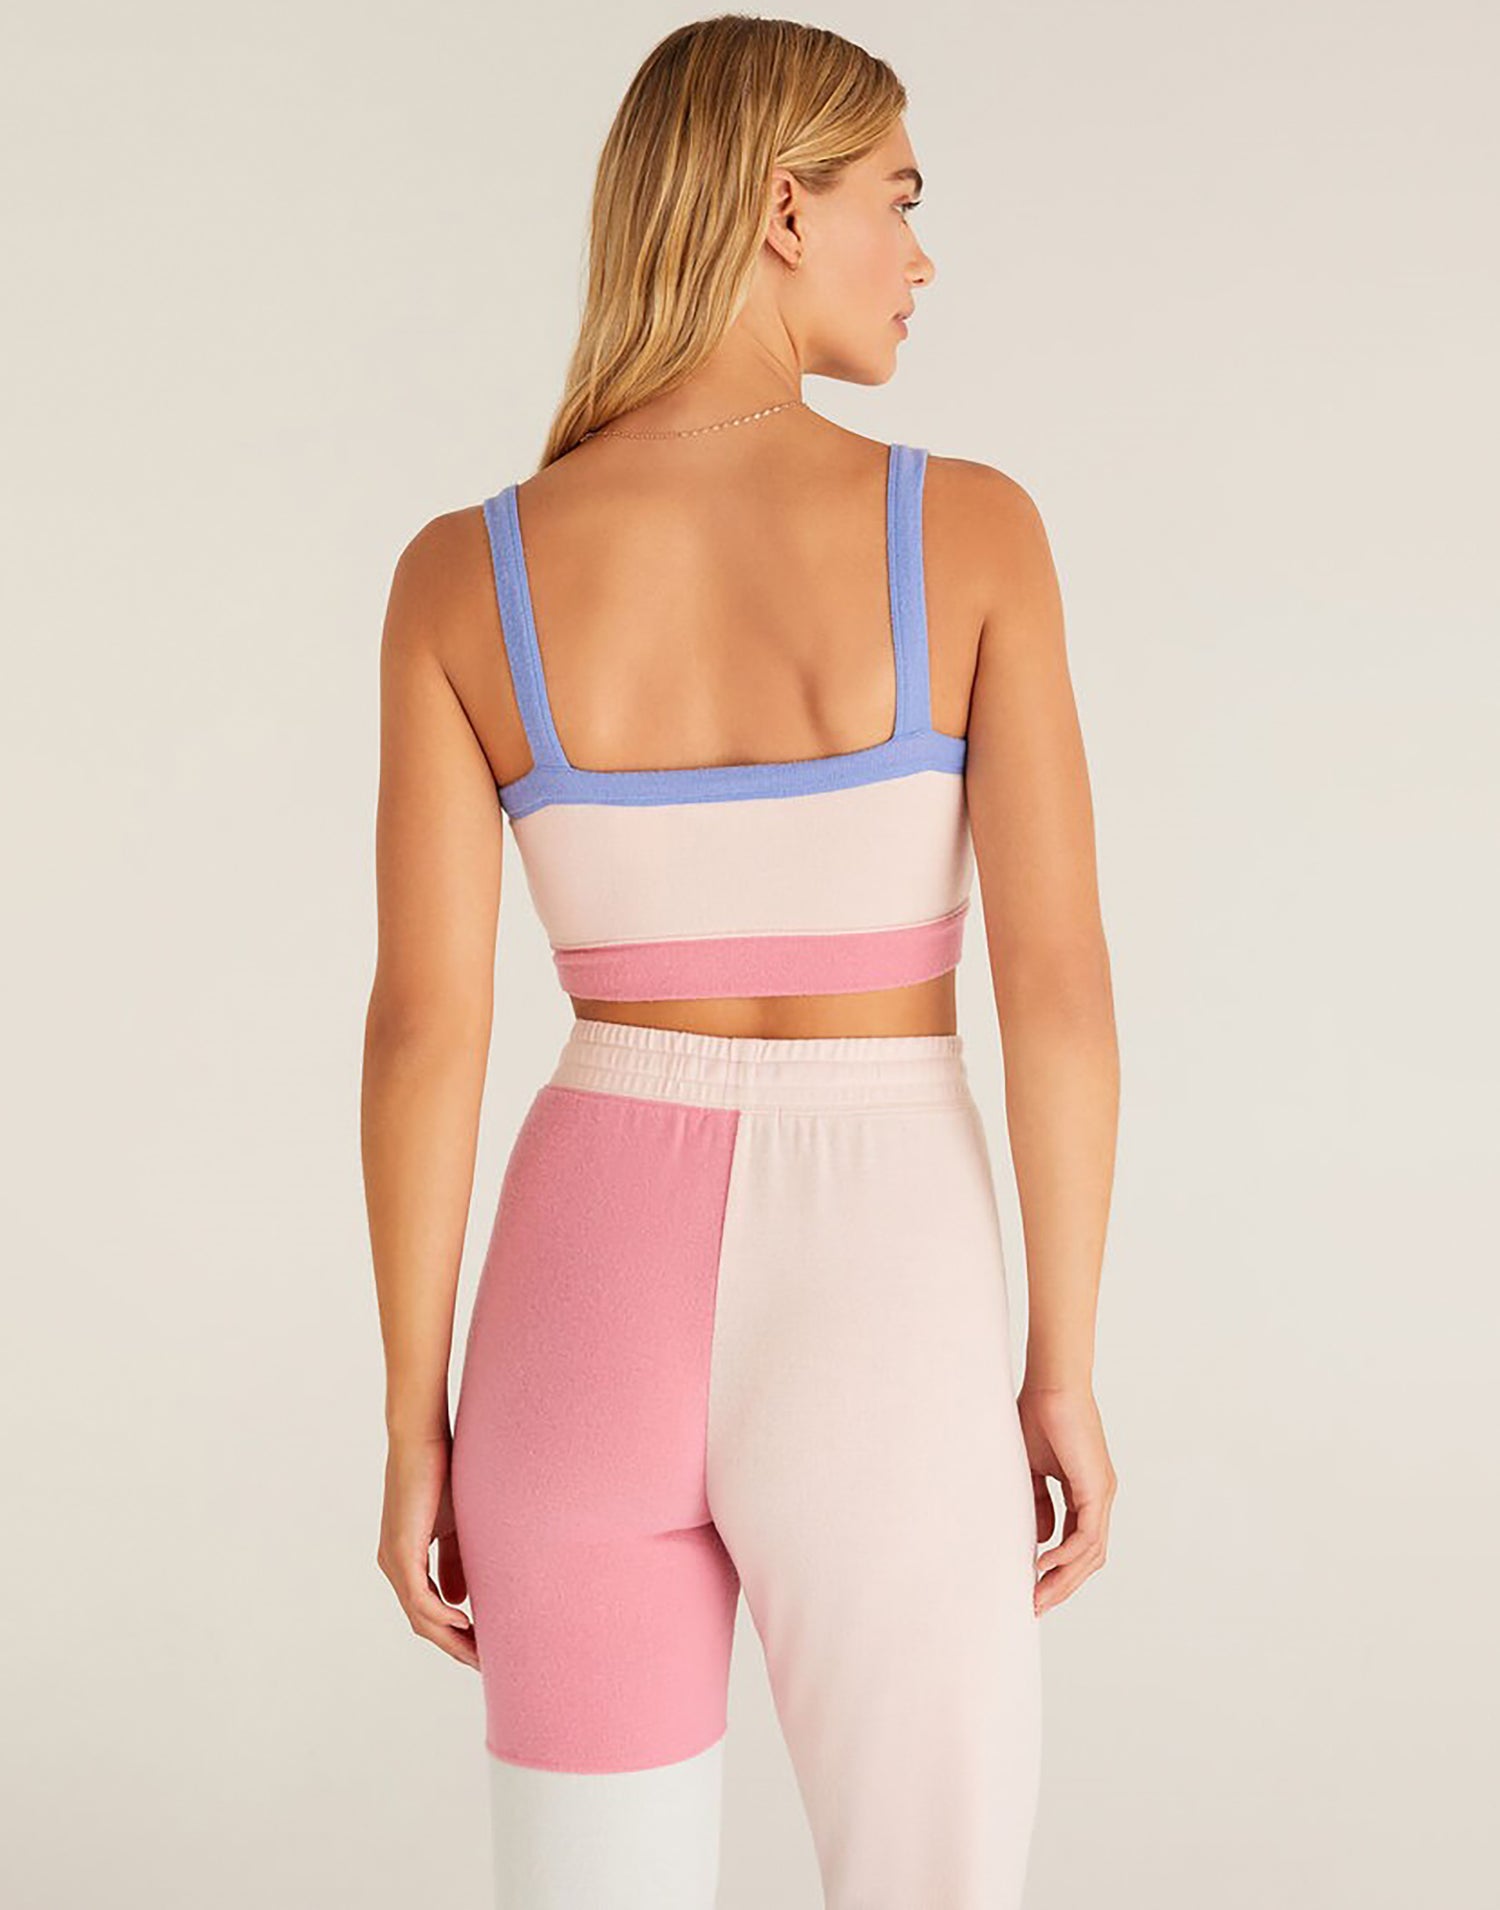 Color Block Scoop Bra by Z Supply in Shell Pink - Back View